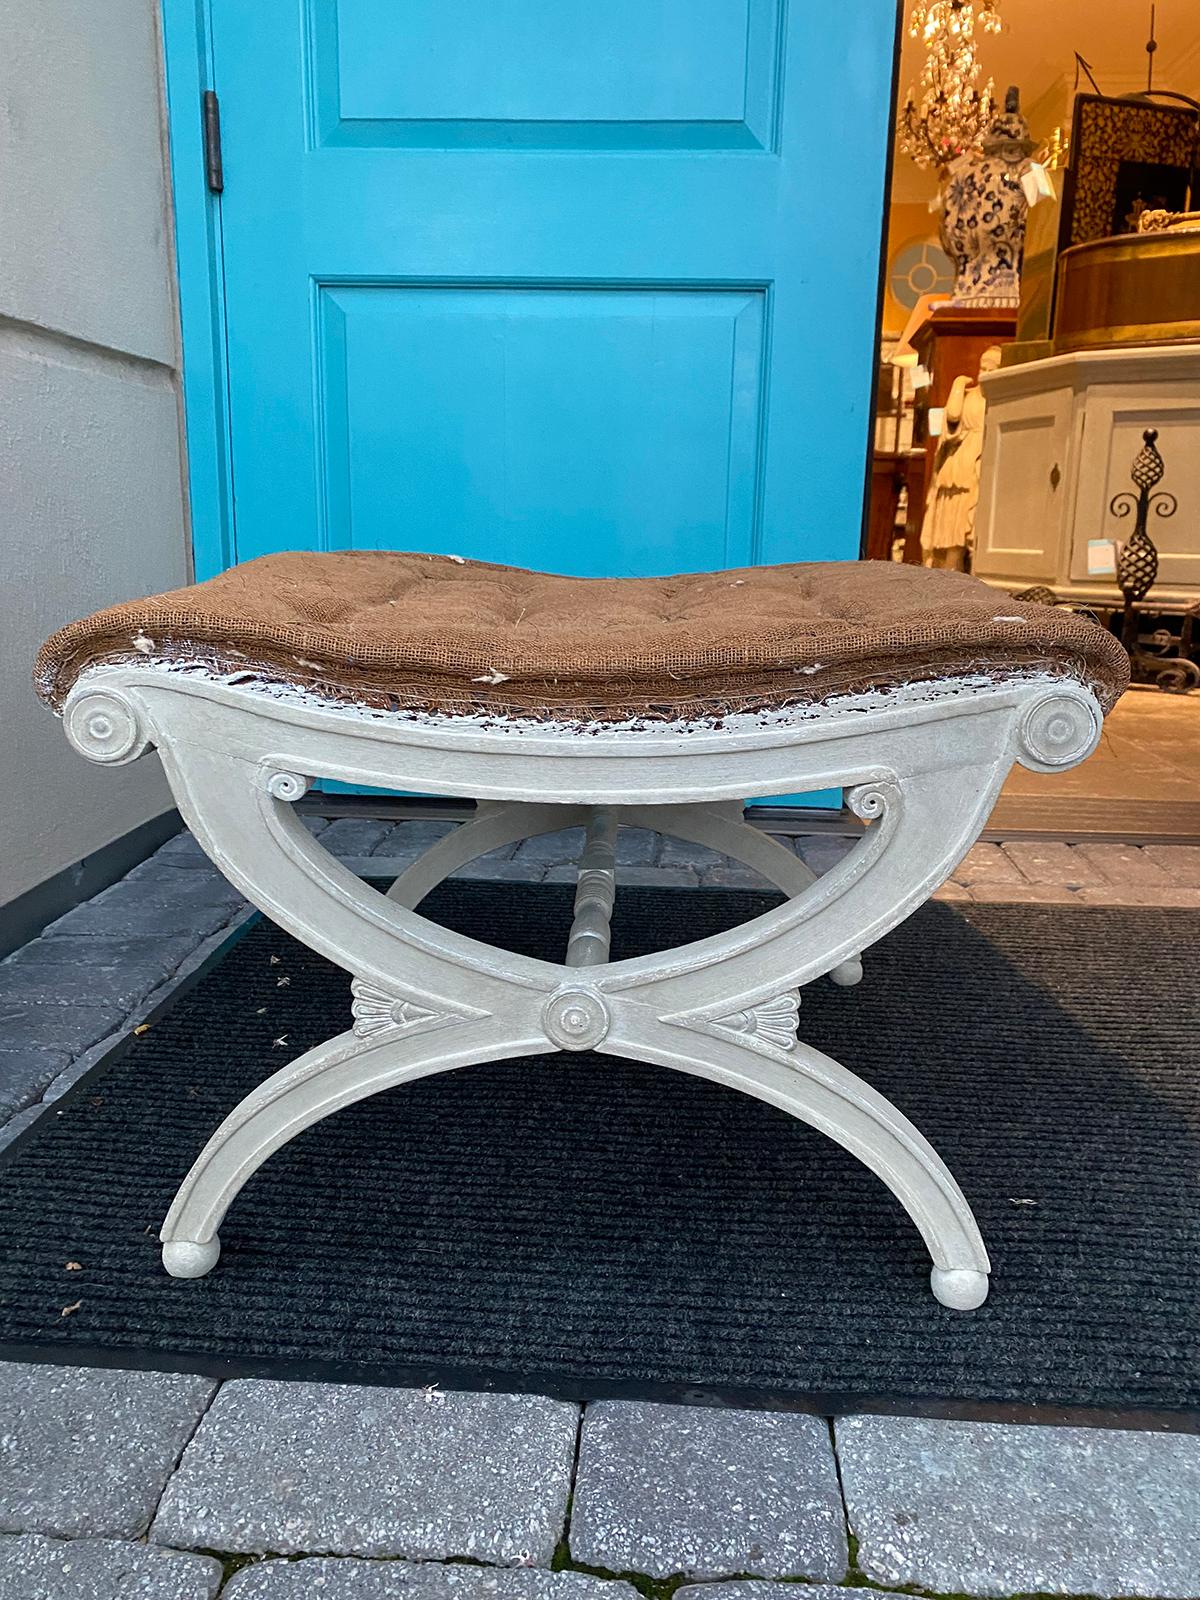 Late 19th-early 20th century Regency style painted bench, custom finish.